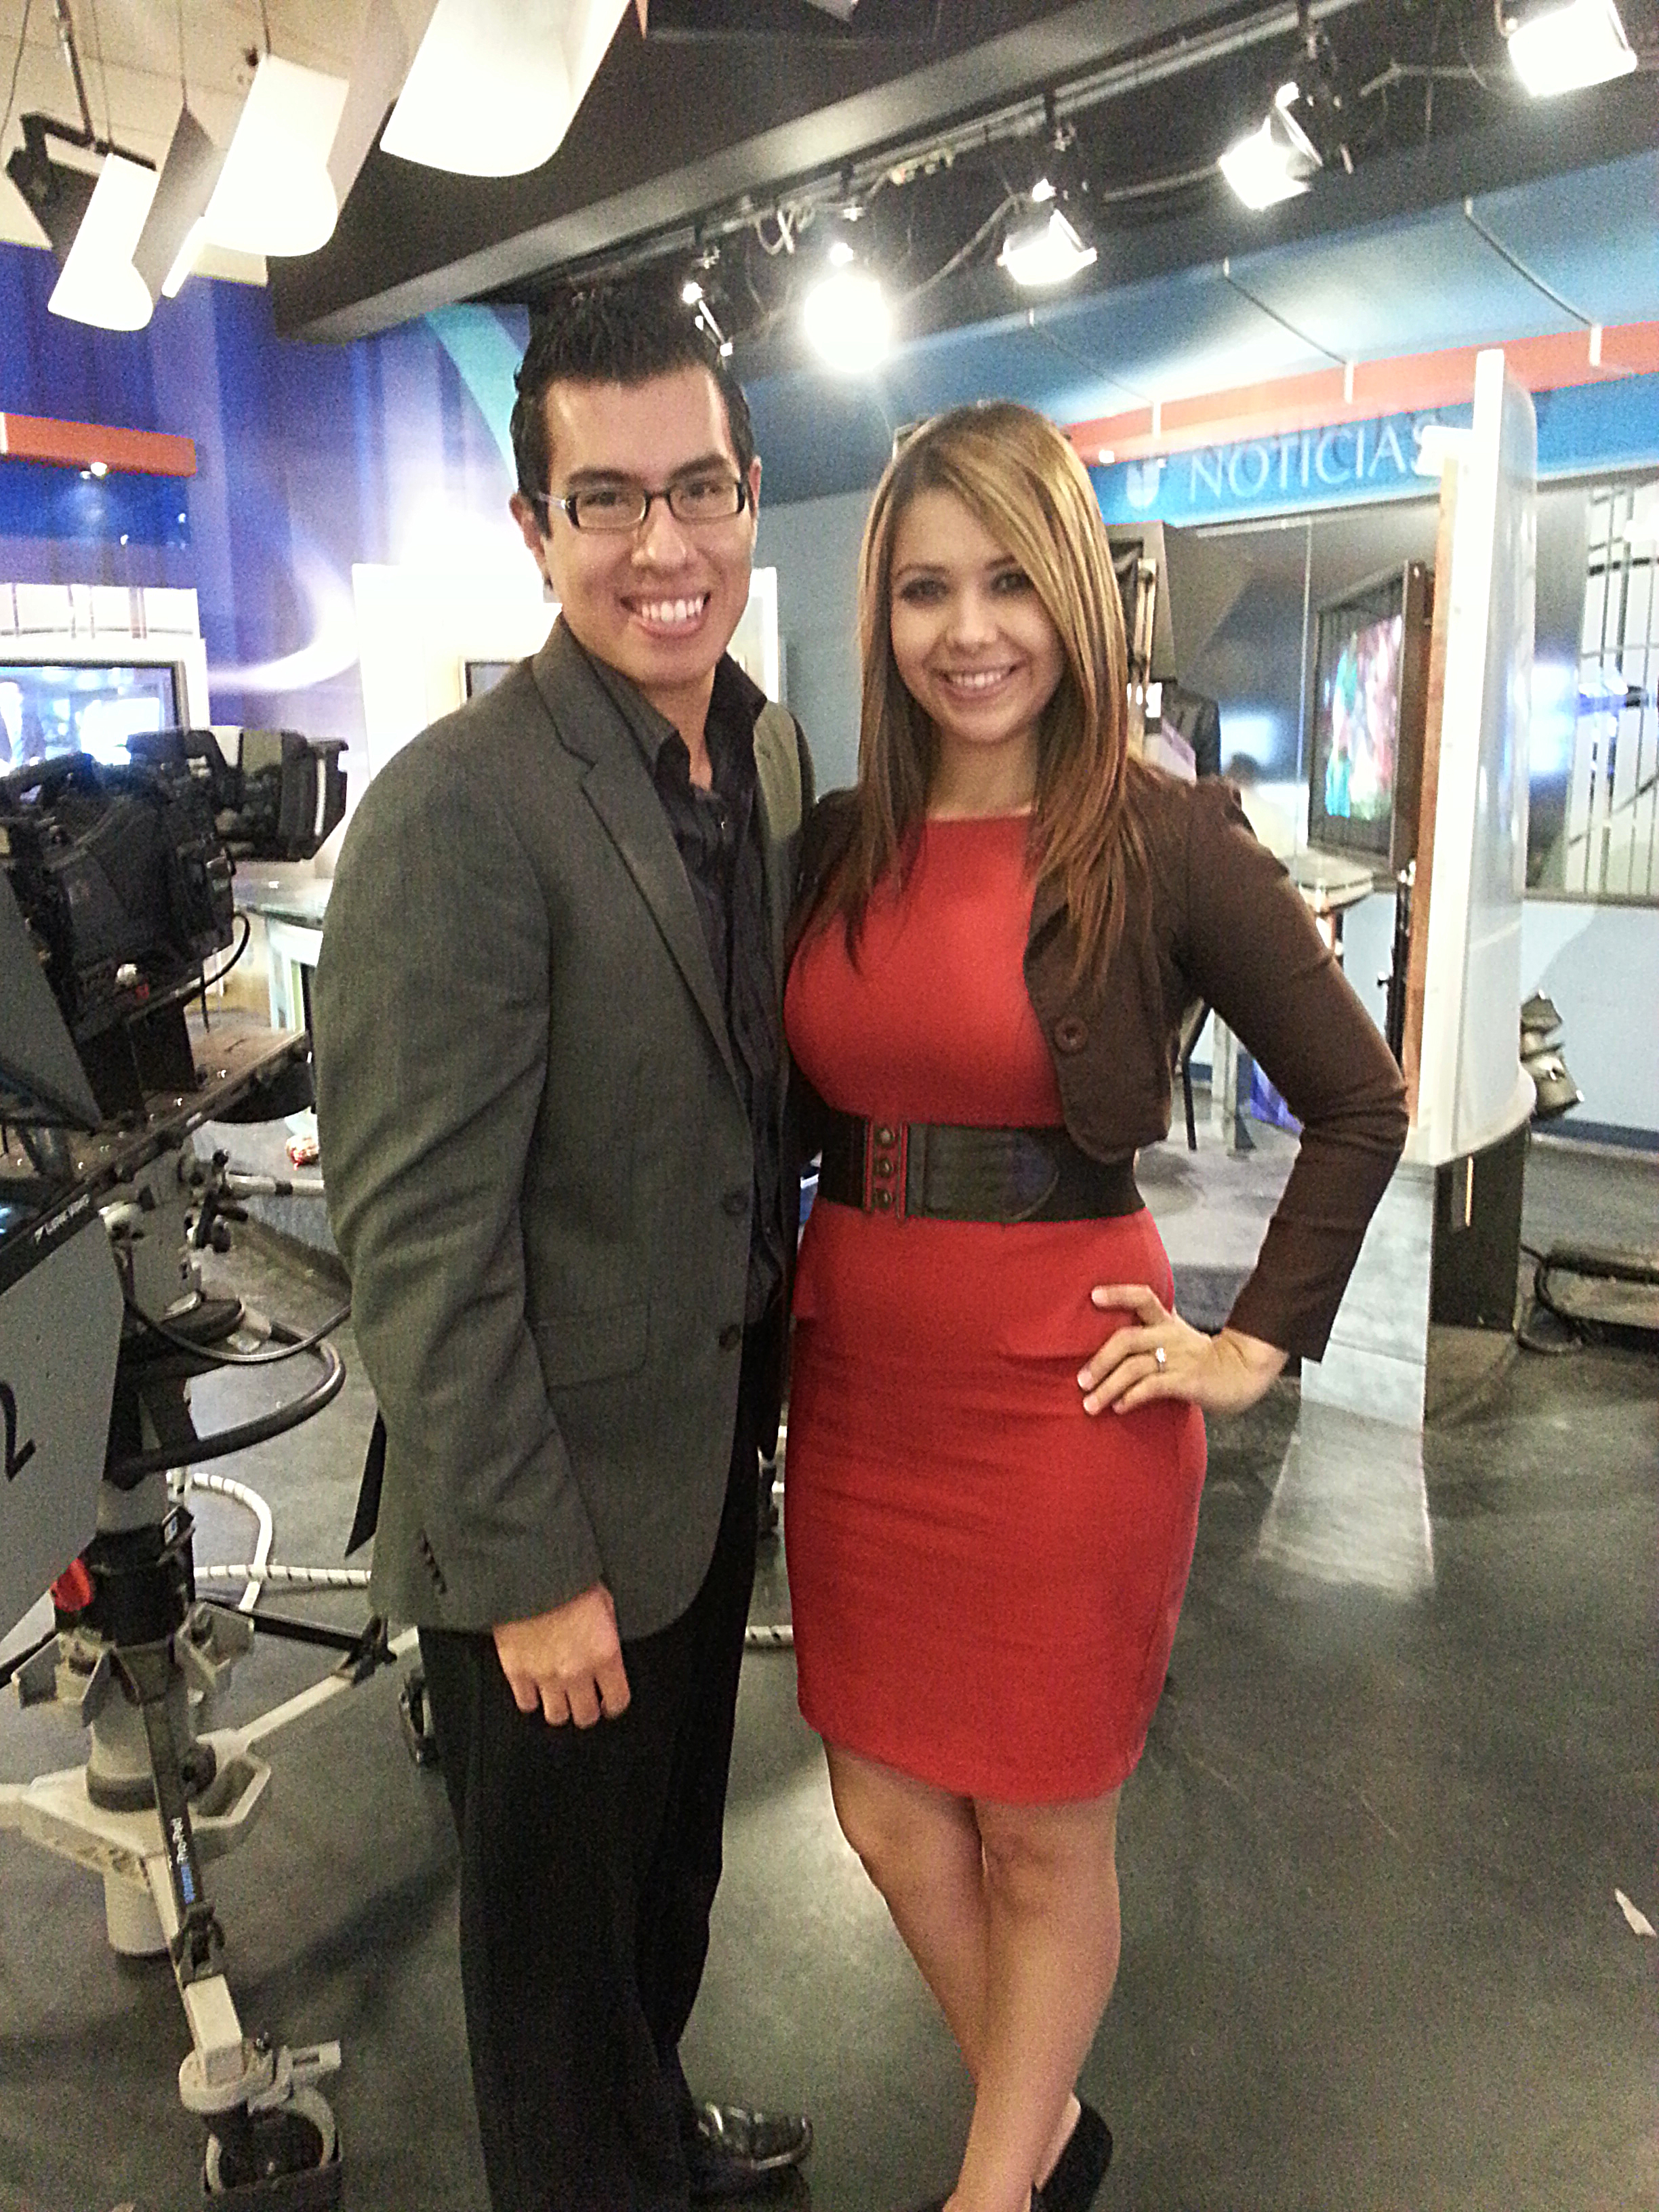 Krisstian de Lara with Brenda Reyes at Univision 26 studios for a live interview about Sub Rosa